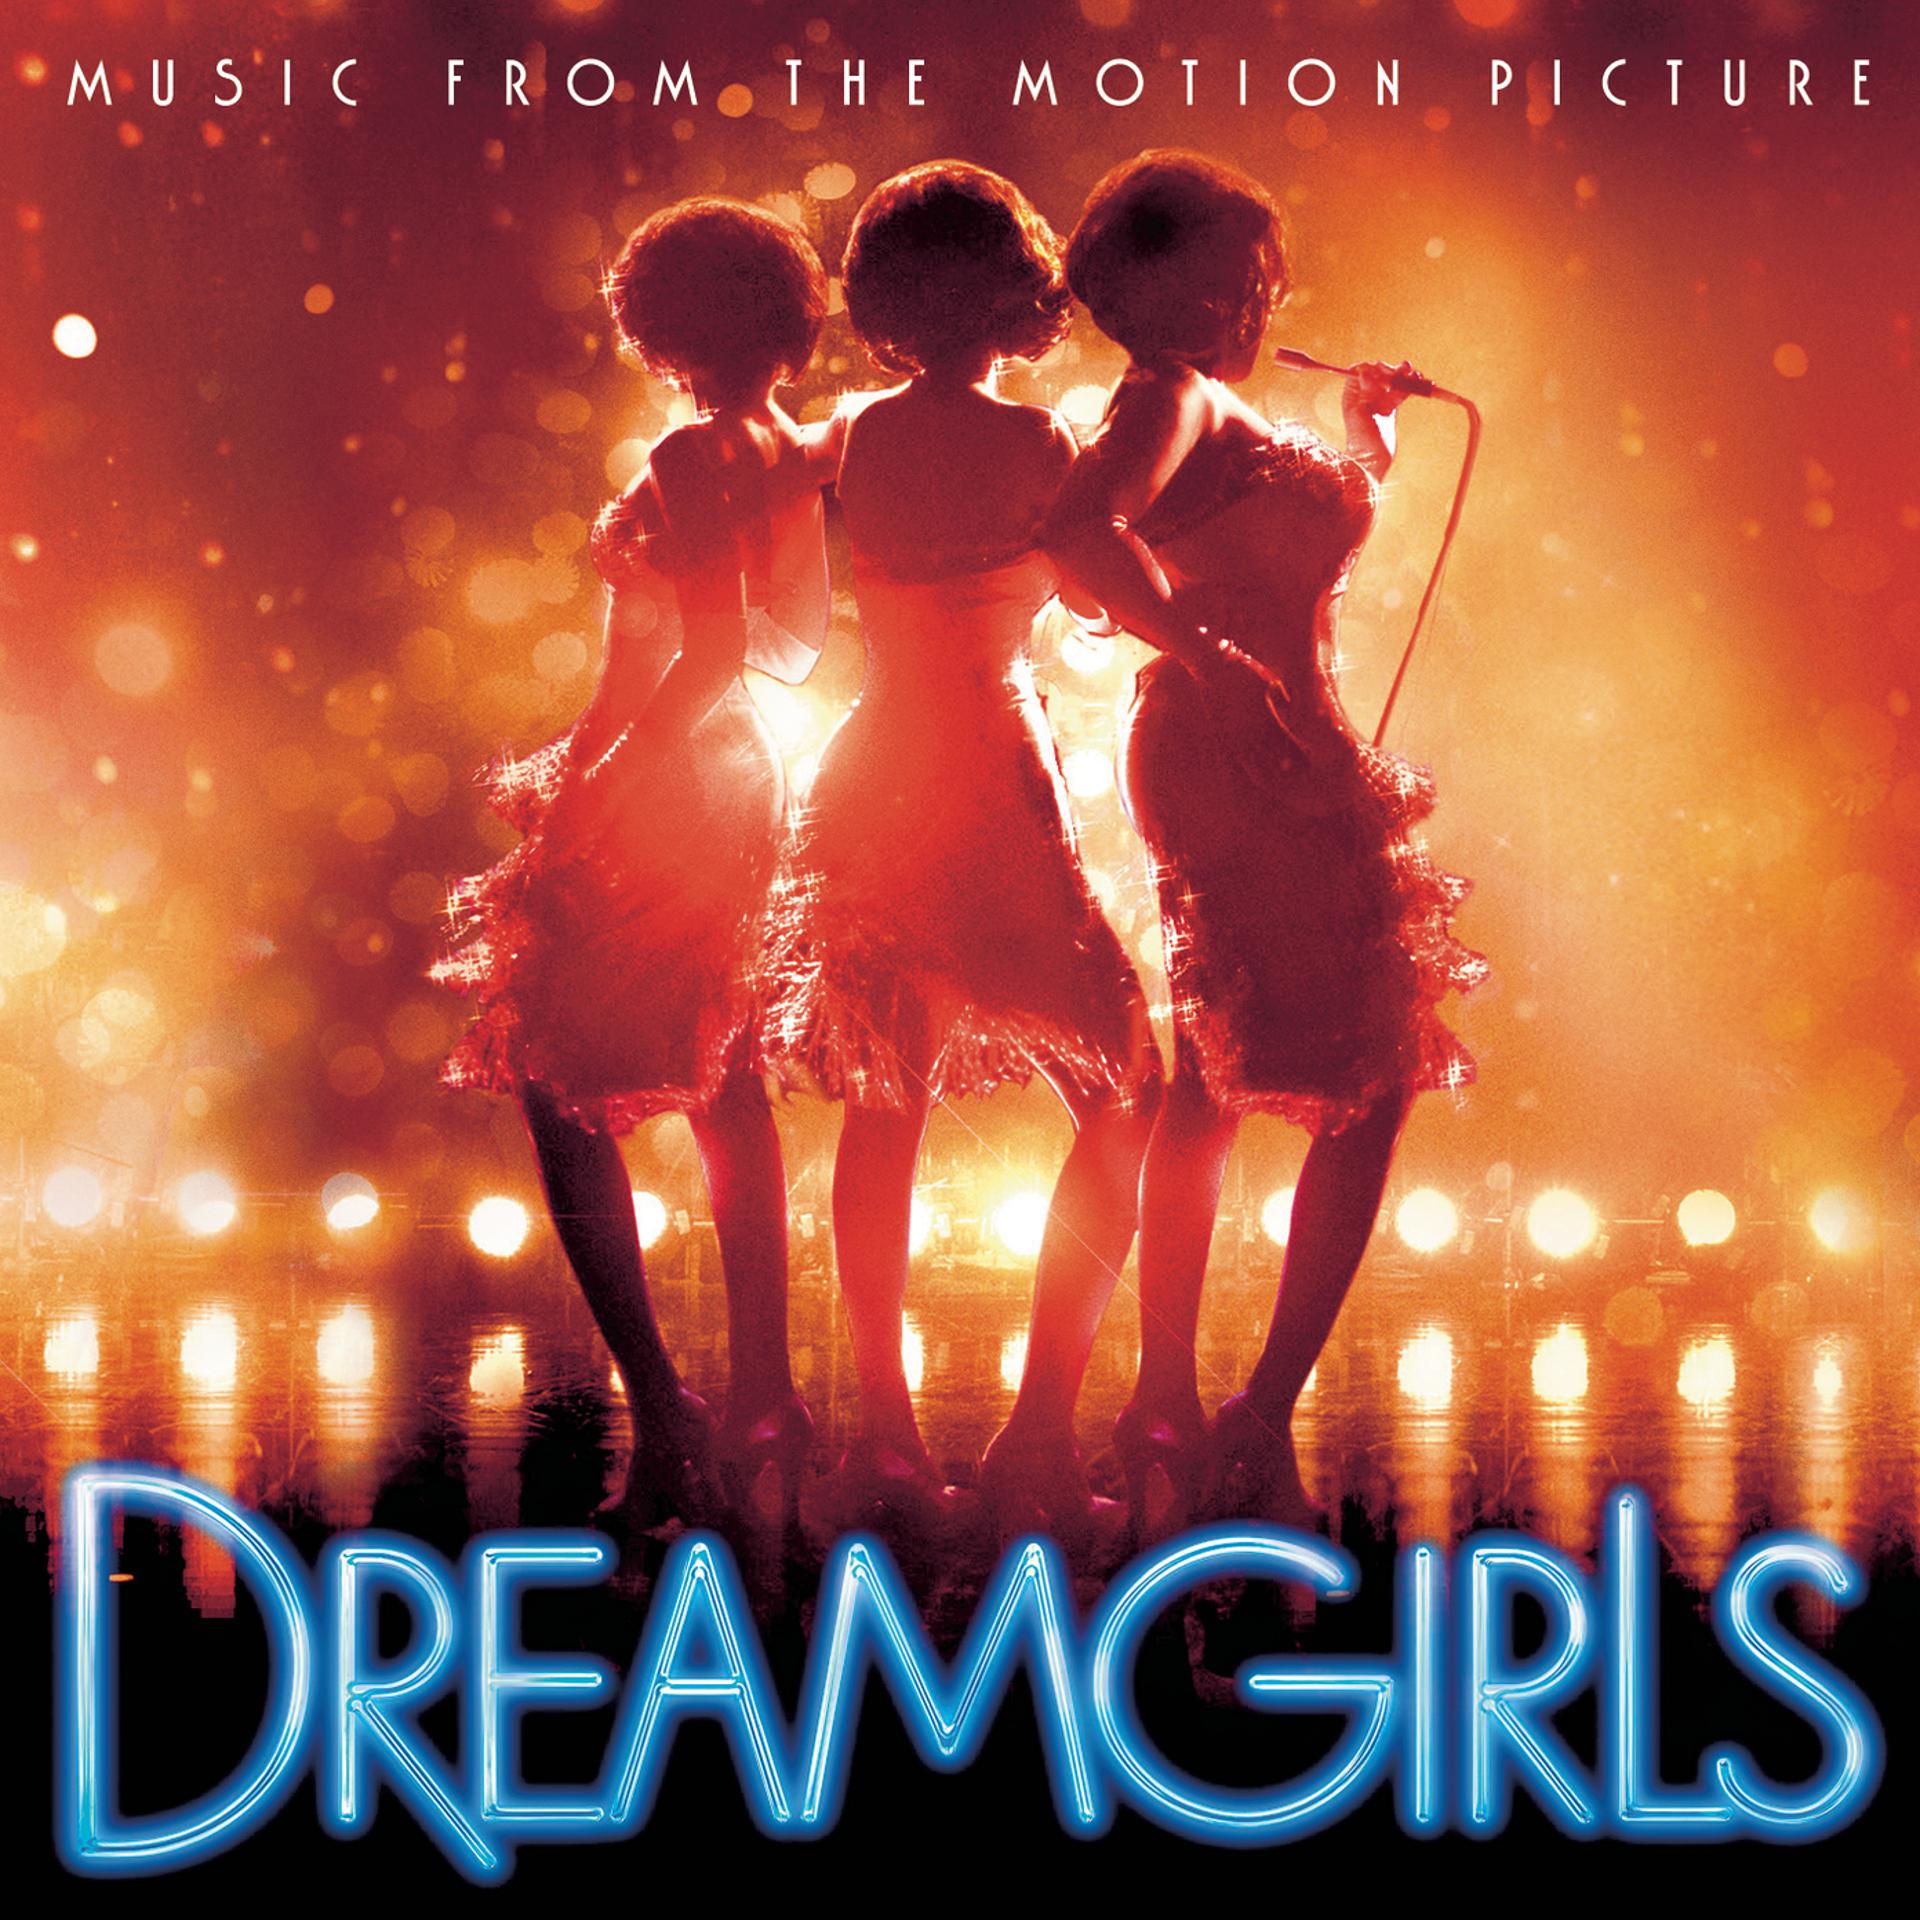 Beyonce Dreamgirls. Music from the Motion picture. Dream girl девушка мечты. Girl soundtrack